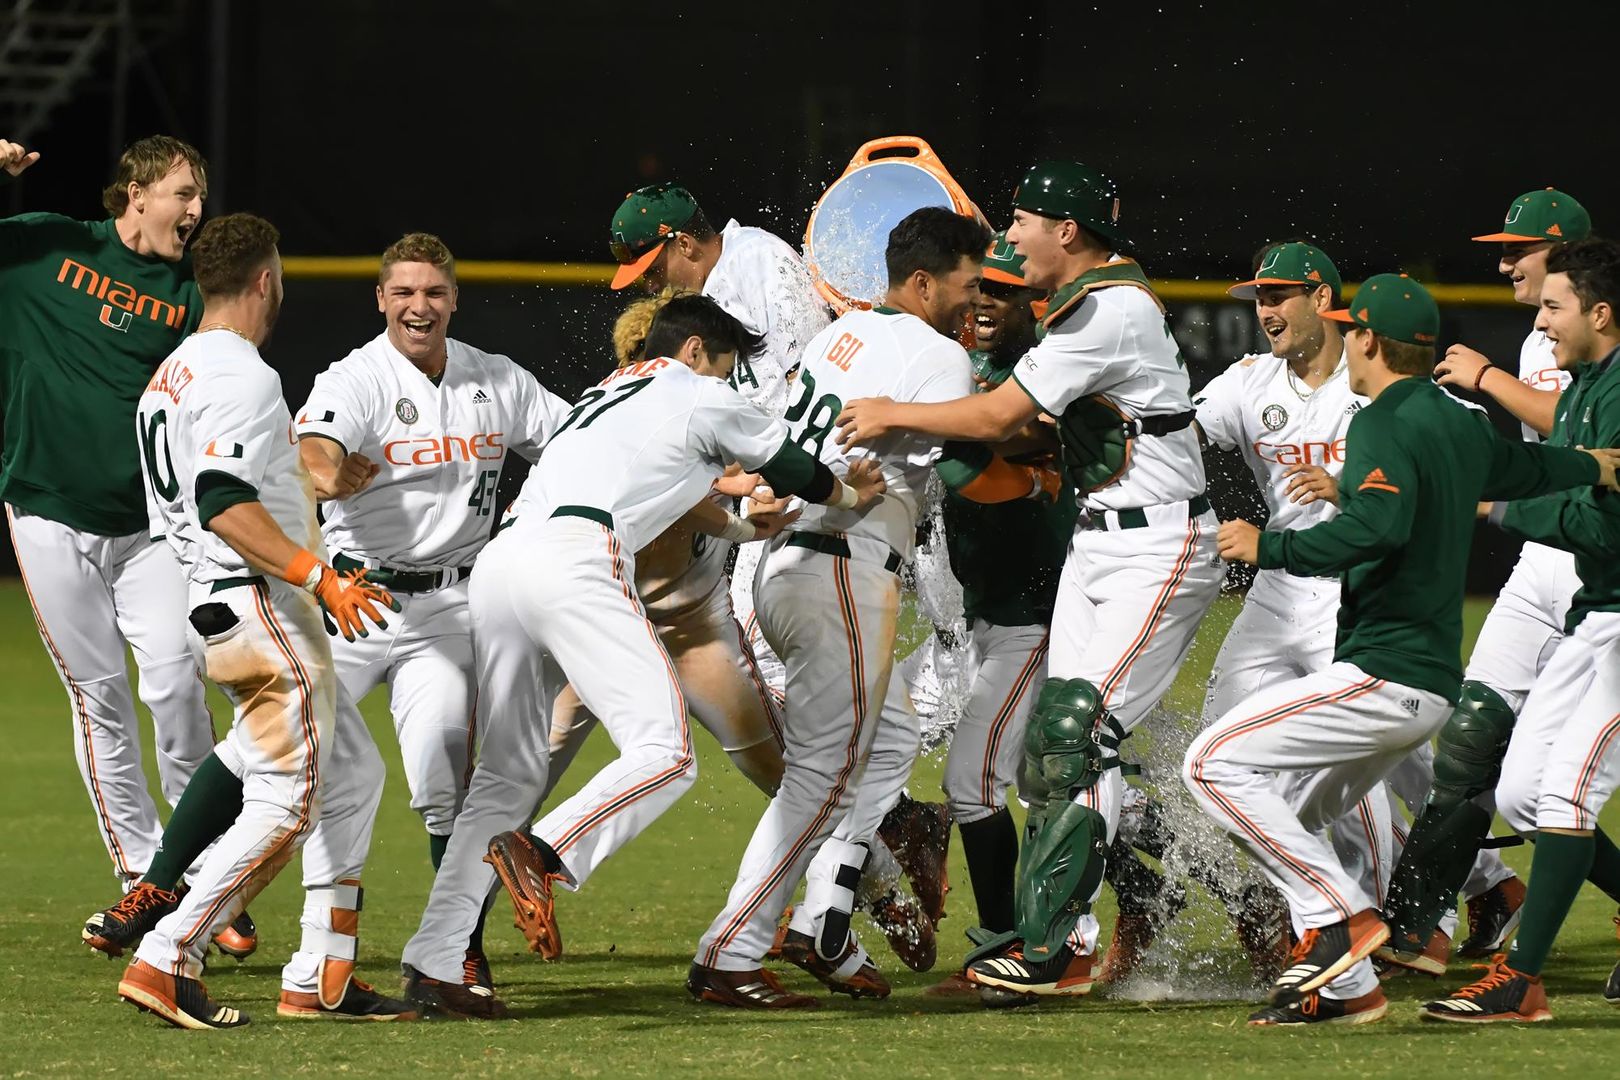 Gil Lifts Miami Past No. 24 Virginia in Extras